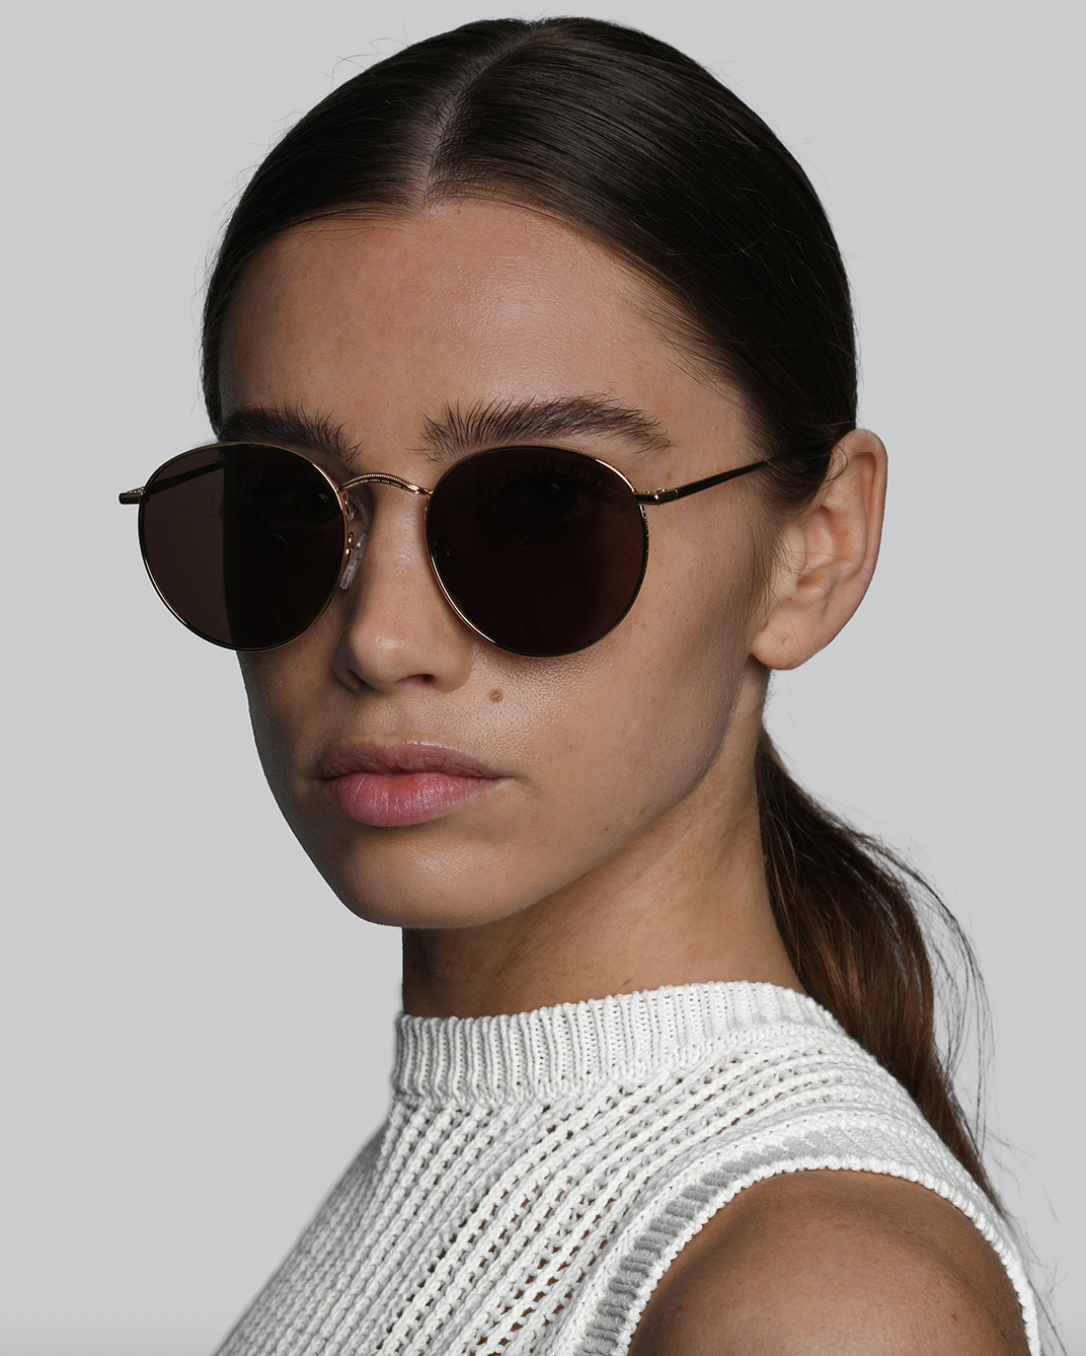 Get ready to turn heads with our Lecce Gold Brown sunglasses by Corlin Eyewear. These sunglasses feature UV protection 400 and scratch-resistant CR39 lenses, perfect for any outdoor activity.